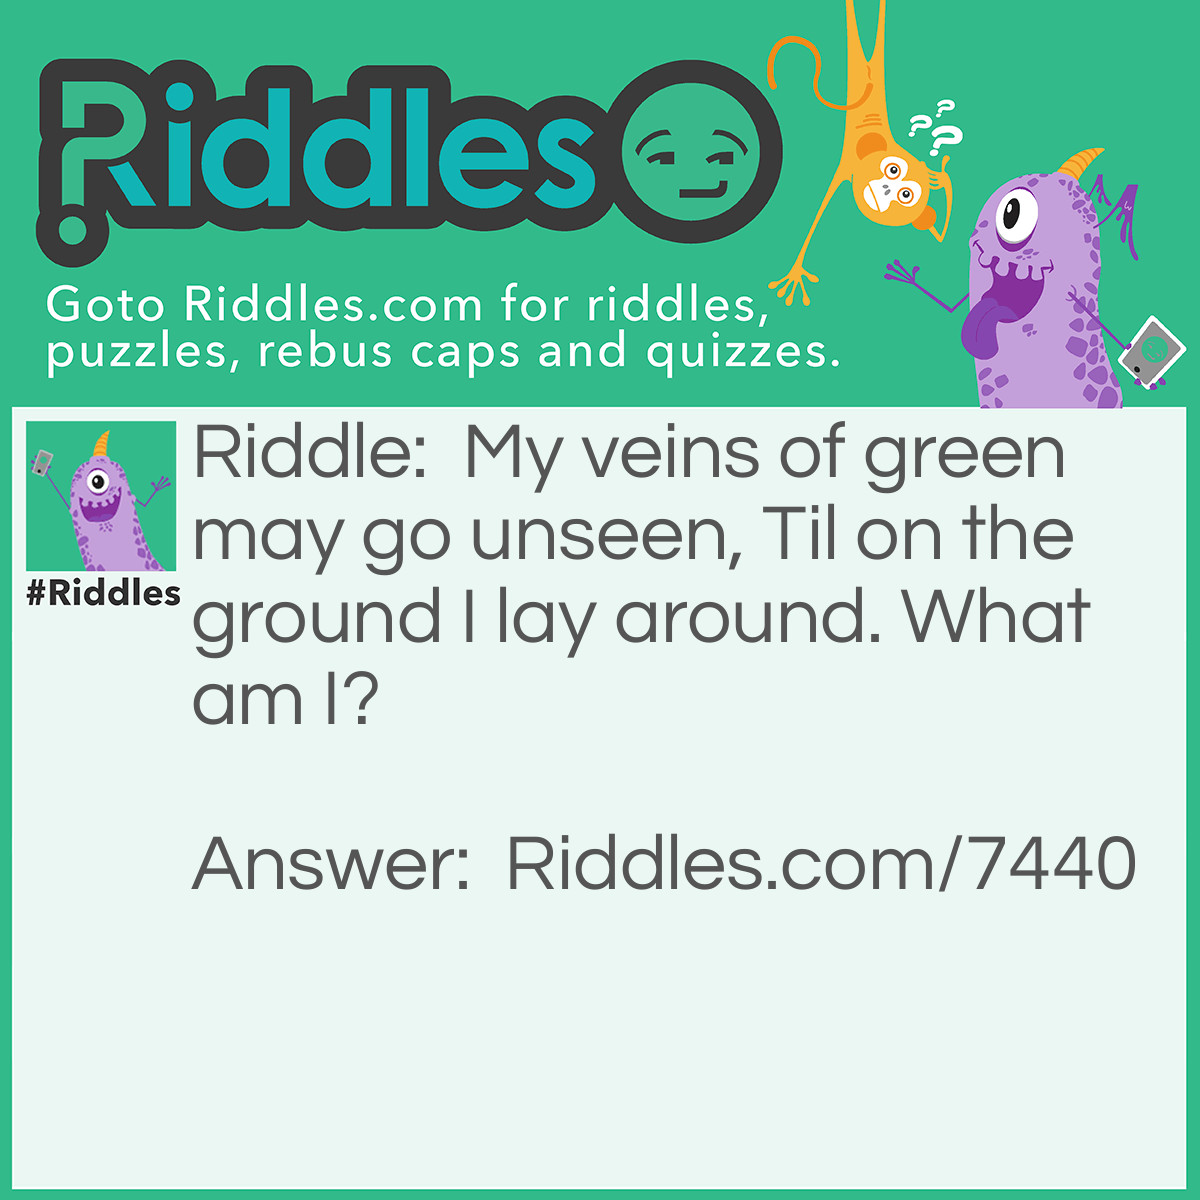 Riddle: My veins of green may go unseen, Til on the ground I lay around. What am I? Answer: "Leaves" - Reasoning: Leaves contain veins to transport water through the leaf, and as people would need to be up close to see them. Hence, these veins go unseen as they spend most of their time up in trees attached to branches. You only really get to see them when they fall to the ground.